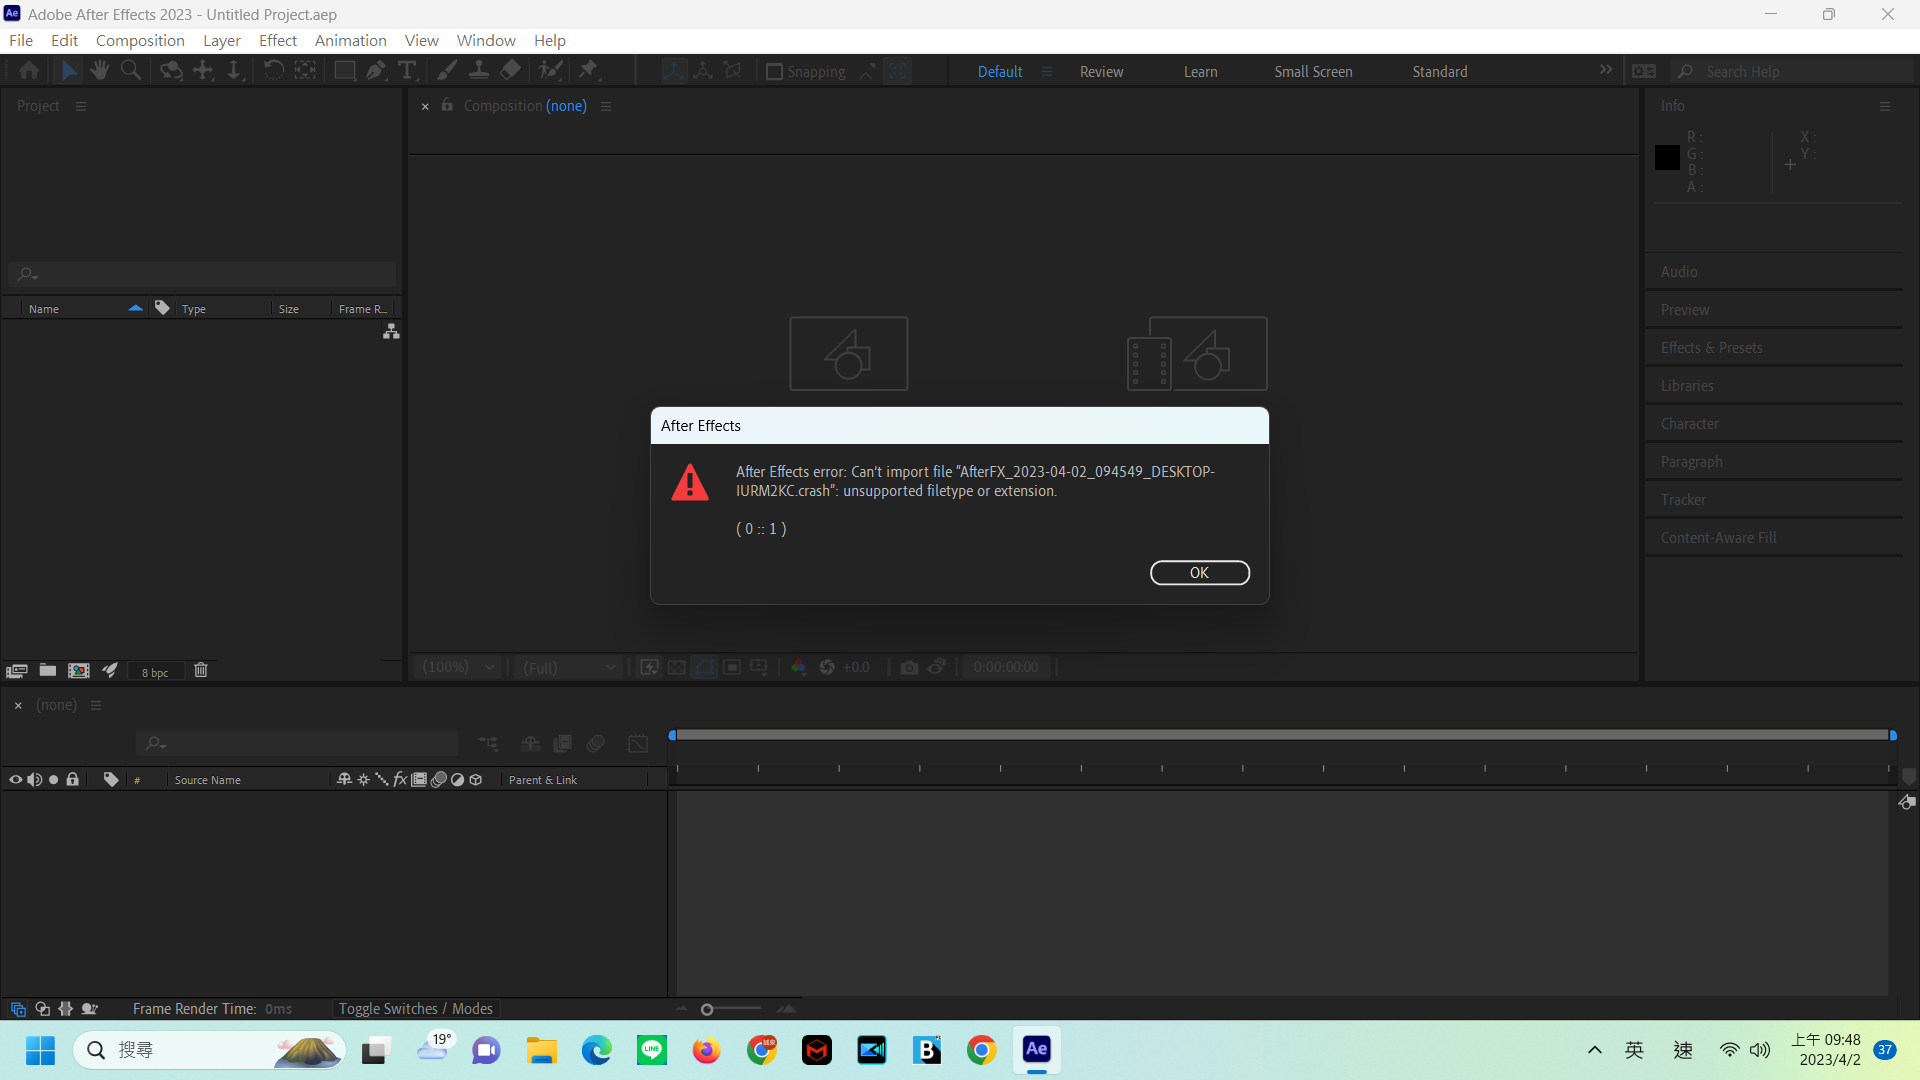 after effects wont download on windows